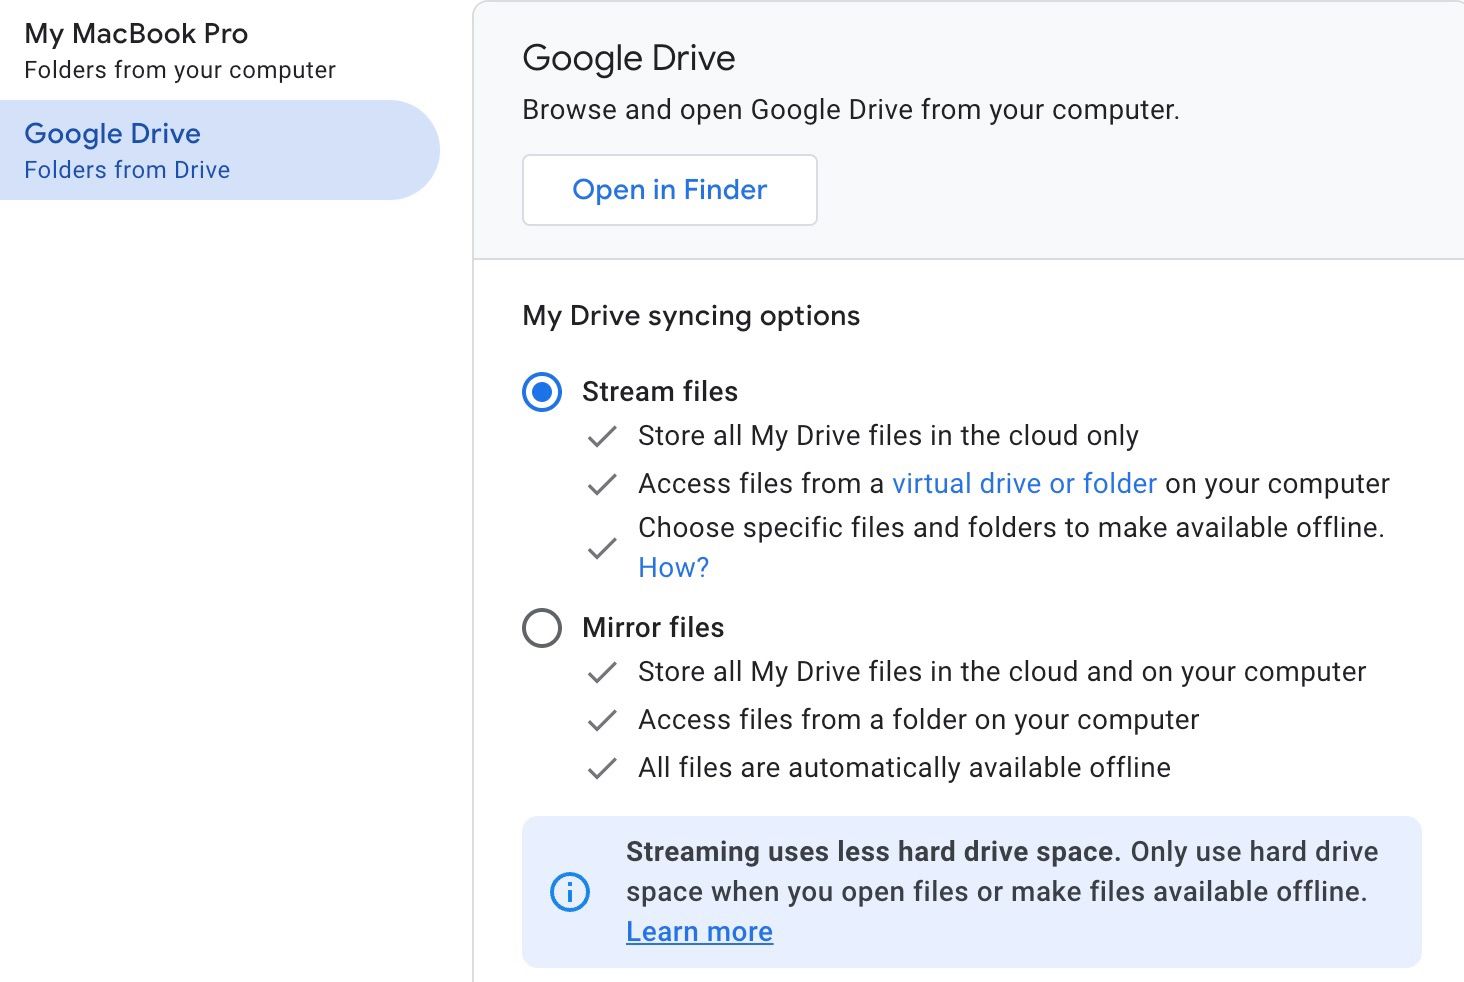 Google Drive syncing options